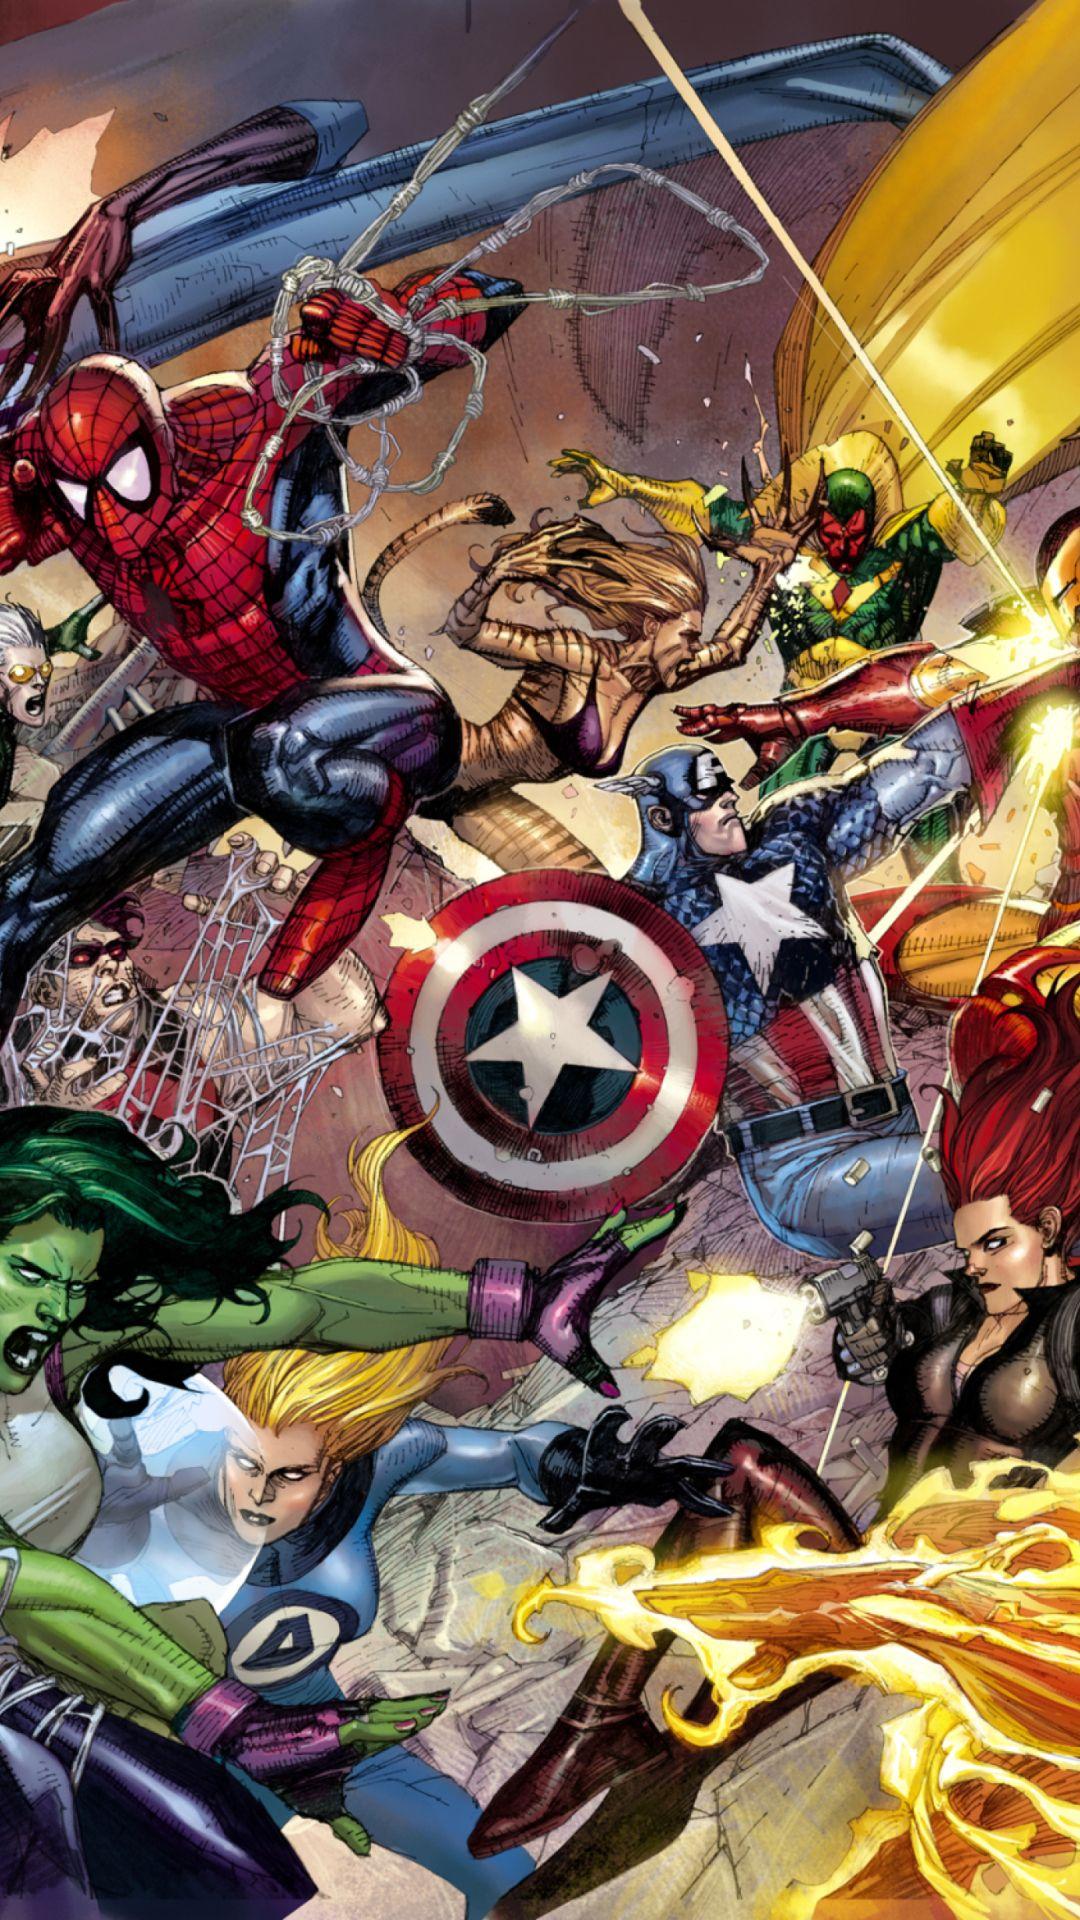 Marvel Iphone Wallpapers Top Free Marvel Iphone Backgrounds Wallpaperaccess